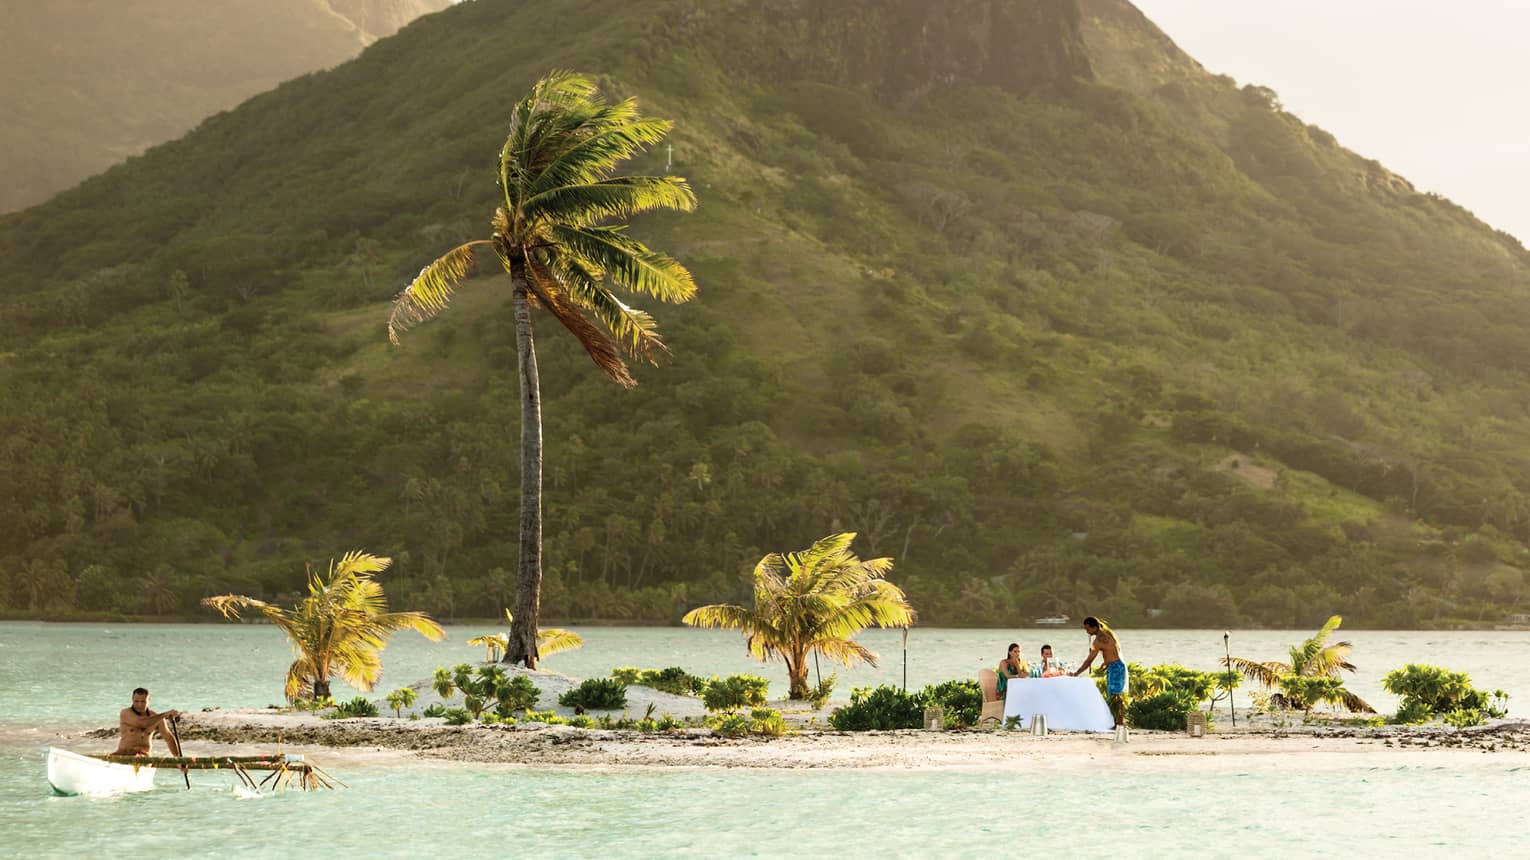 Couple dines on small private island with windswept palm trees in lagoon under mountain